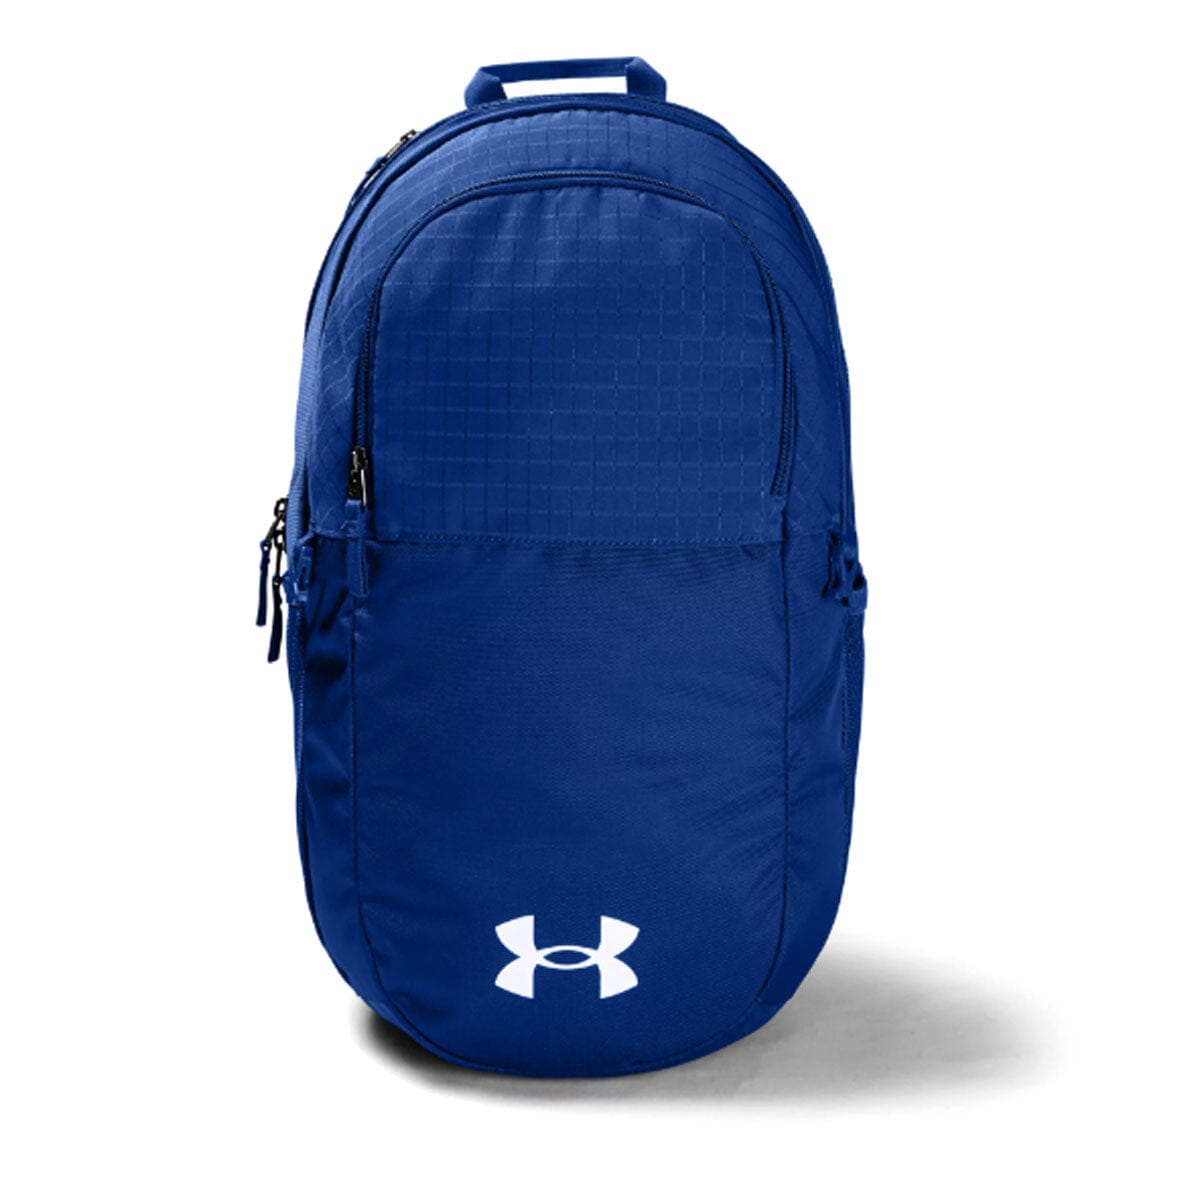 Under Armour All Sport Backpack Royal Blue